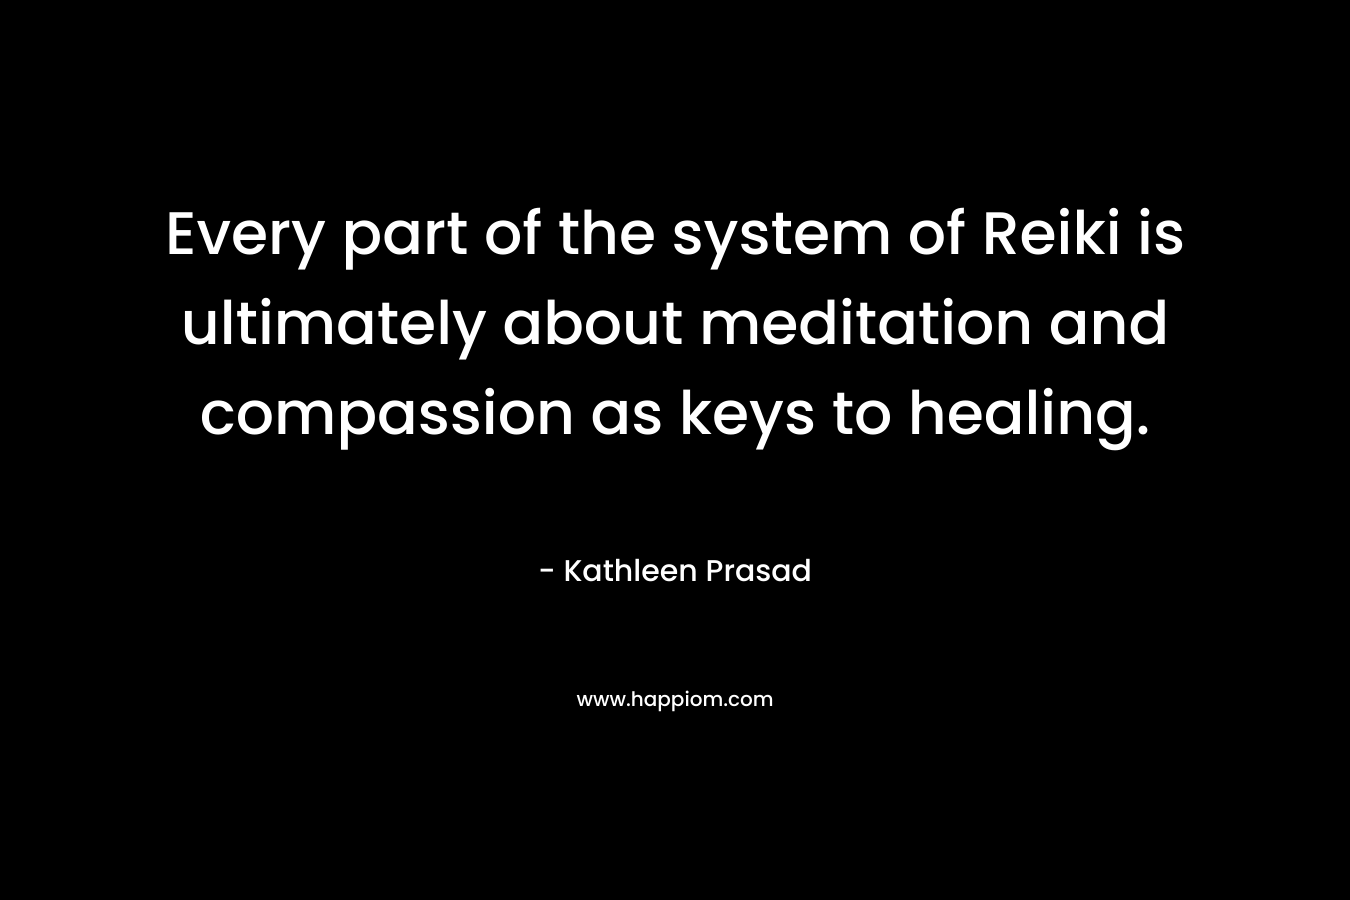 Every part of the system of Reiki is ultimately about meditation and compassion as keys to healing. – Kathleen Prasad